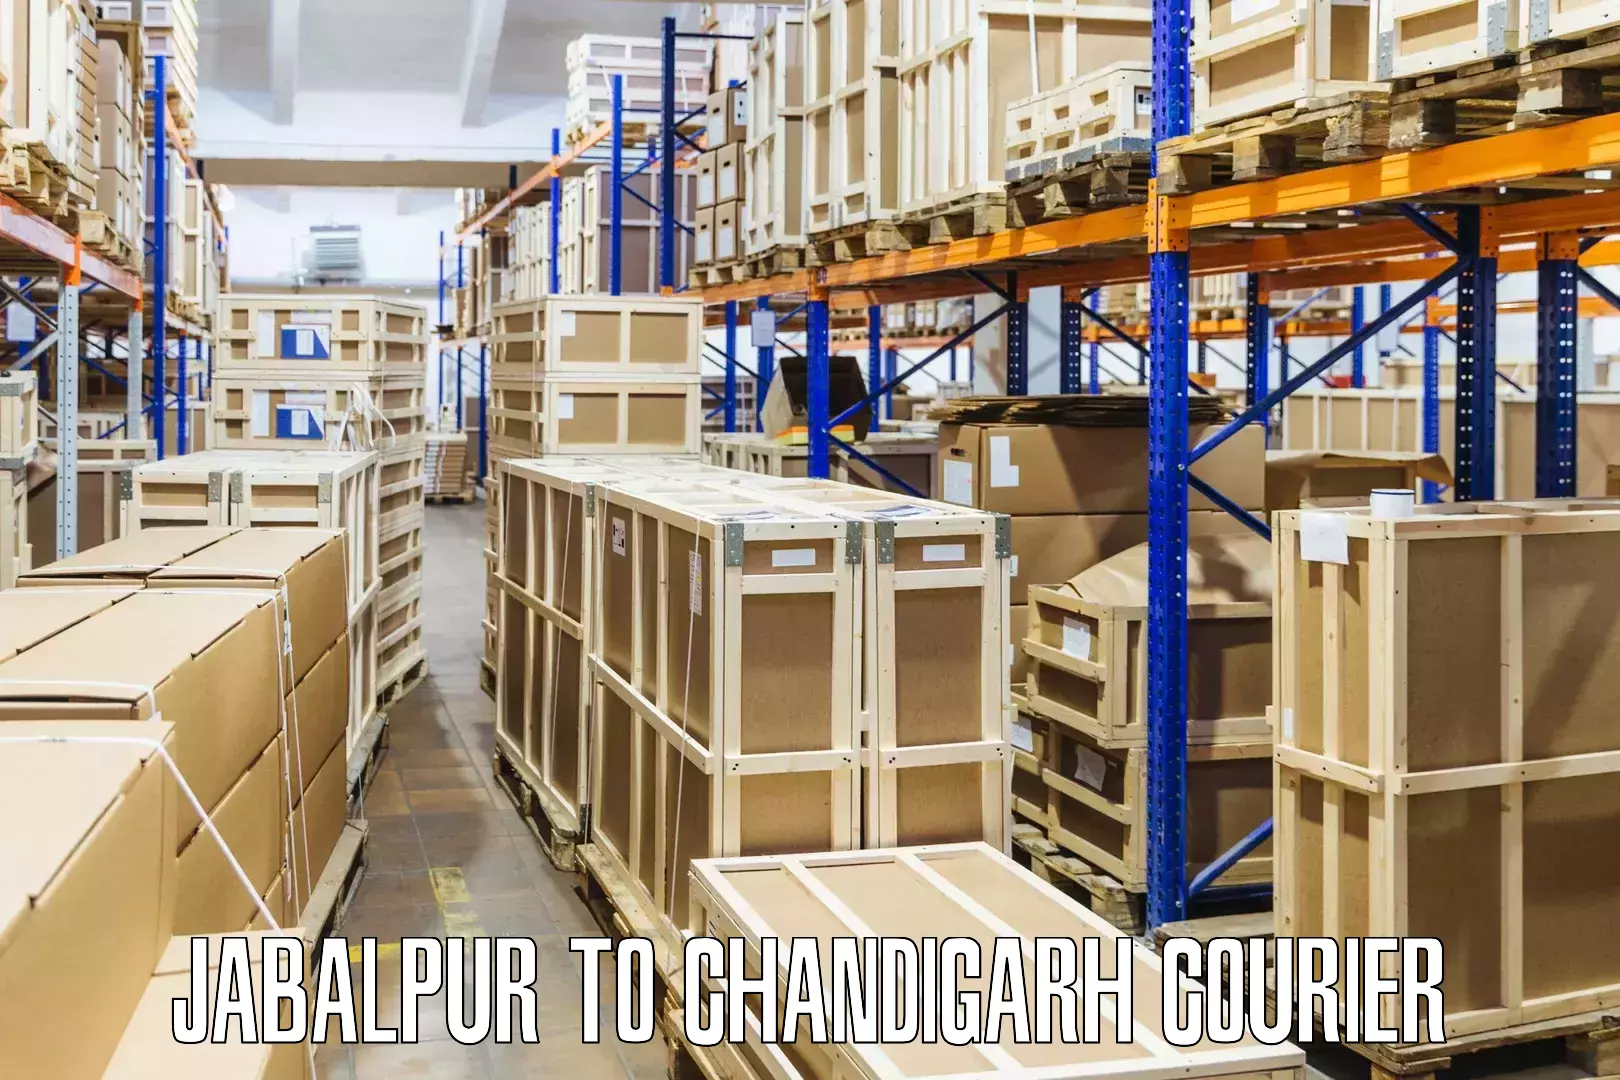 Express delivery capabilities Jabalpur to Chandigarh